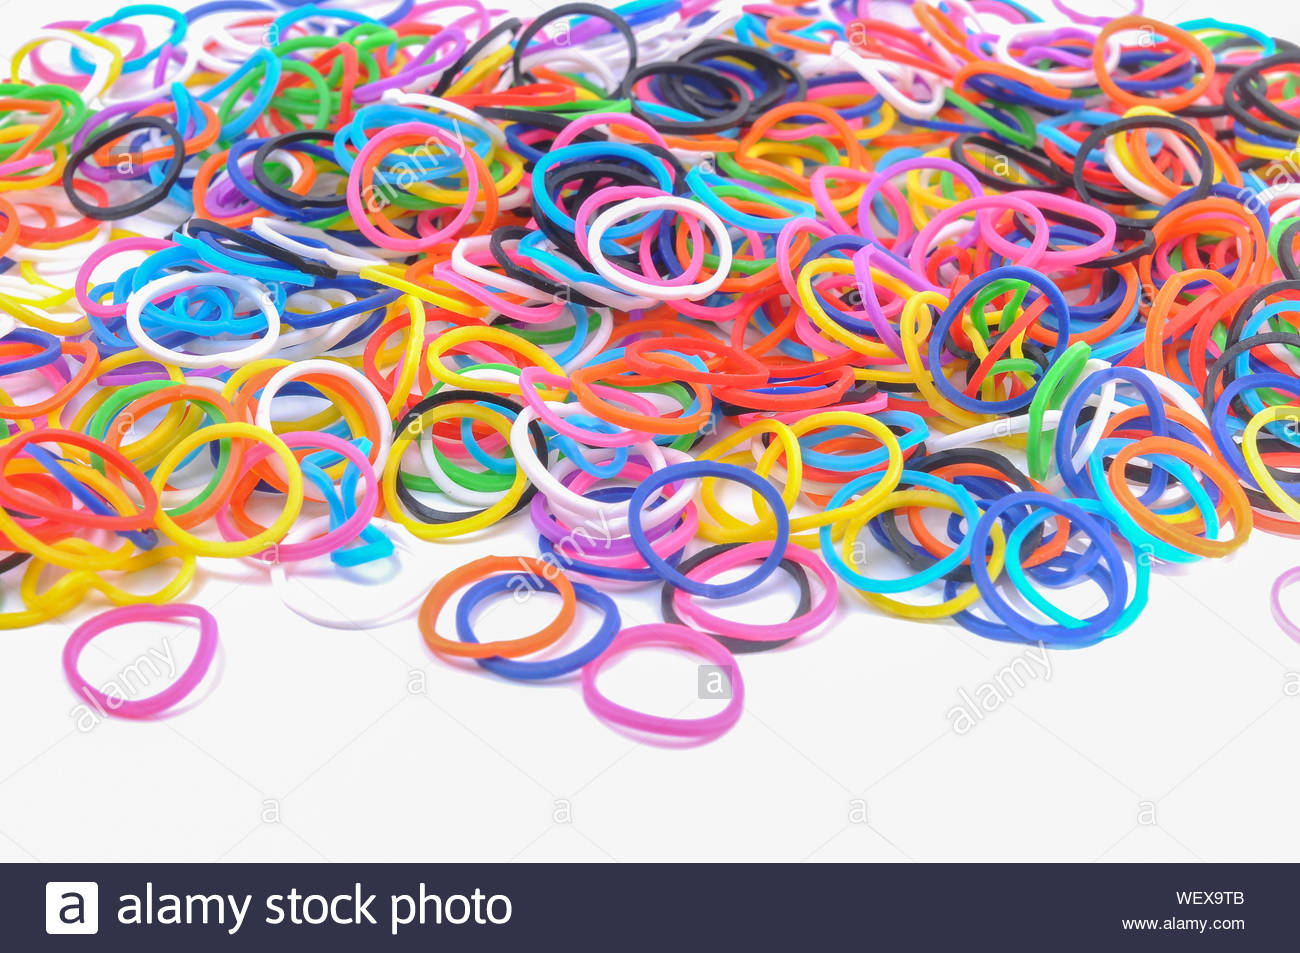 Close Up Of Colorful Rubber Bands On White Background Stock Photo